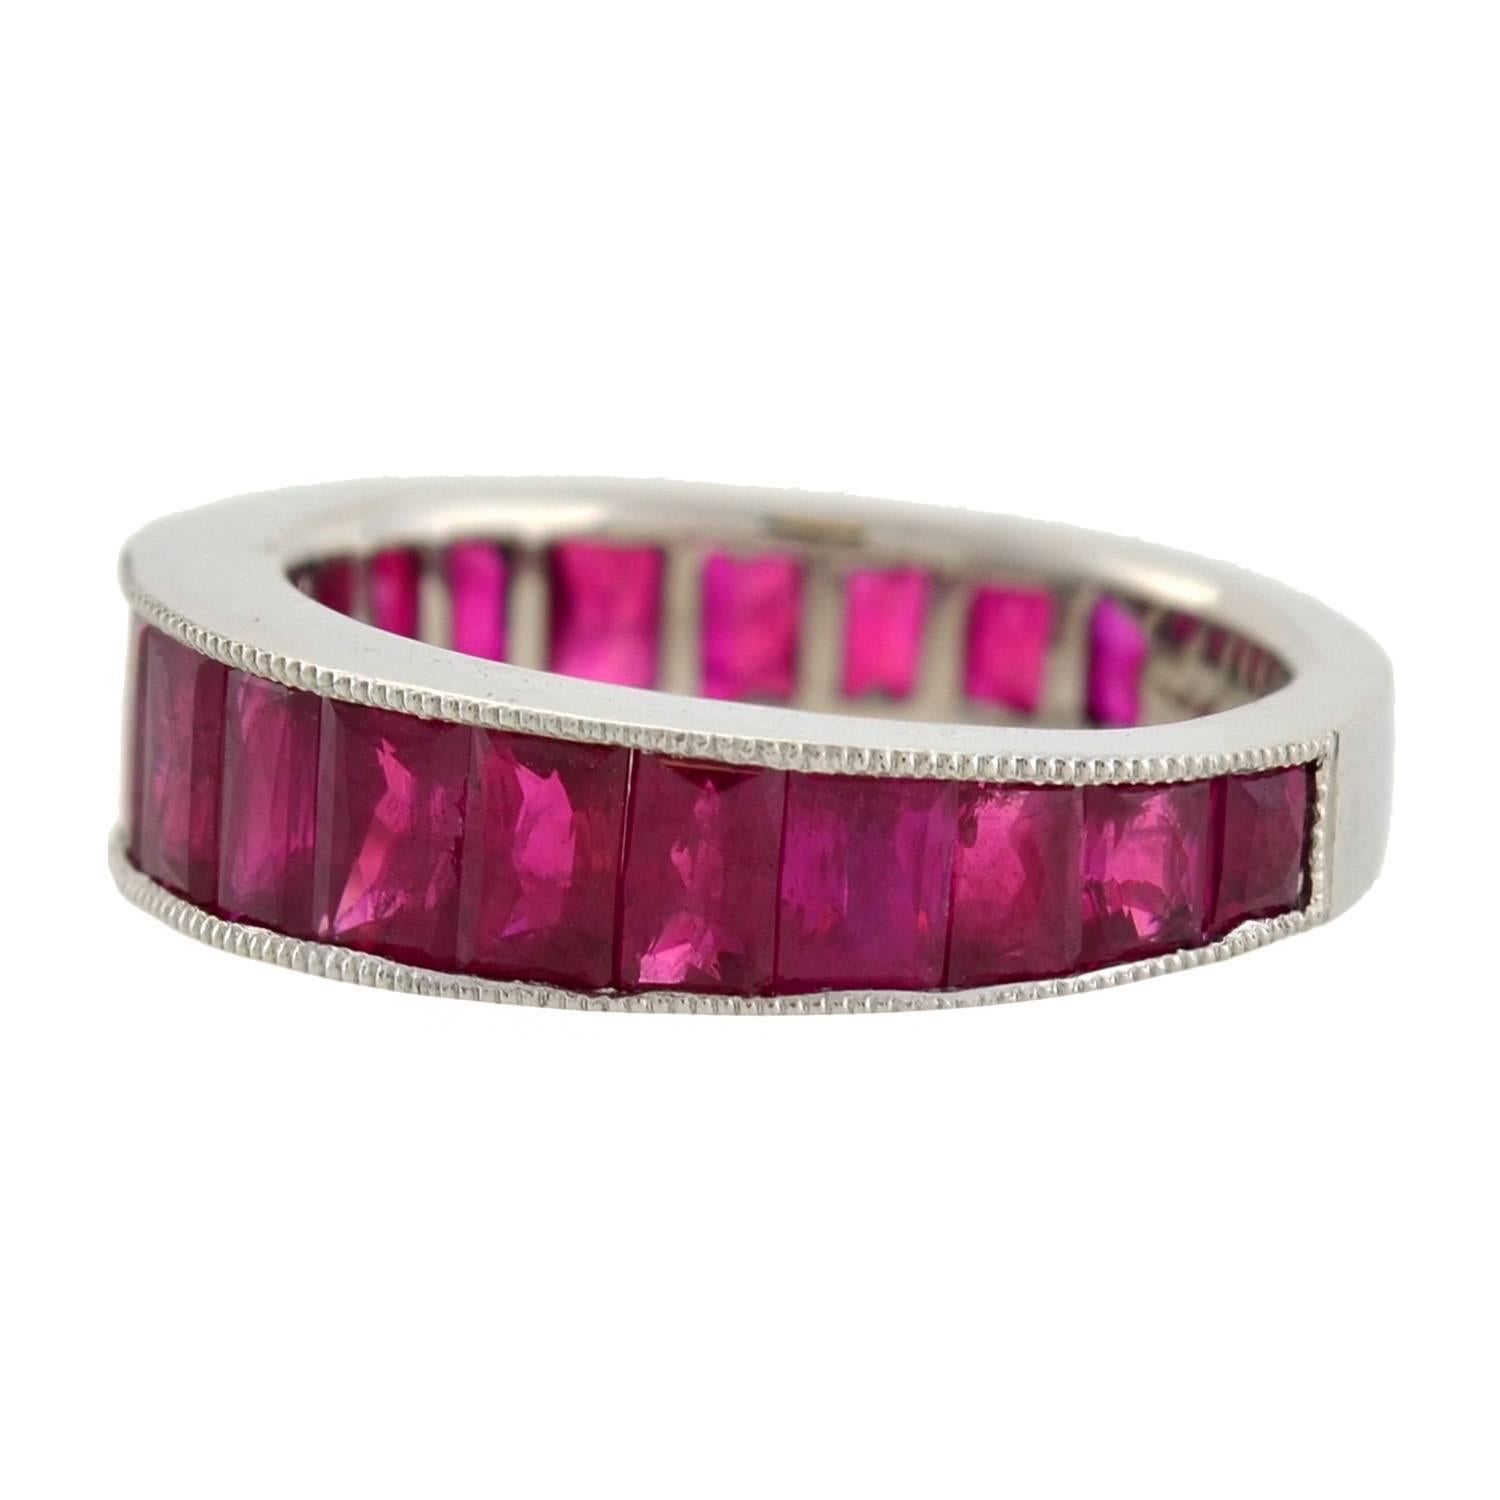 French Cut Contemporary 5.50 Total Carat Burmese Ruby Eternity Band Ring